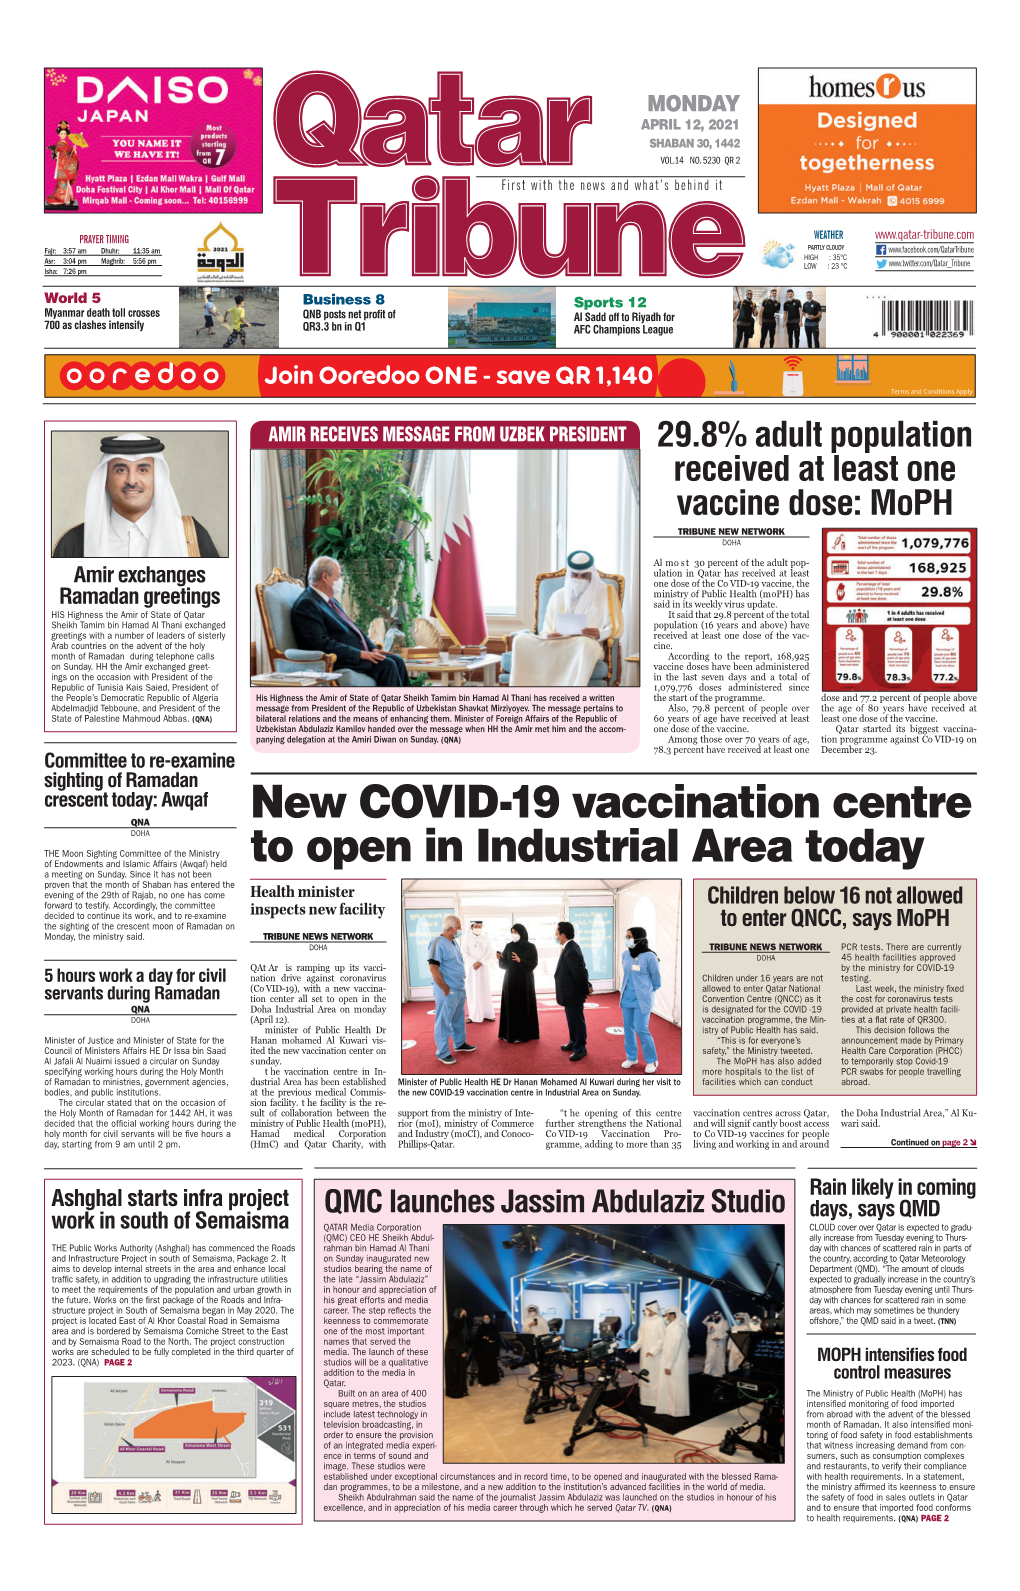 New Covid-19 Vaccination Centre to Open in Industrial Area Today